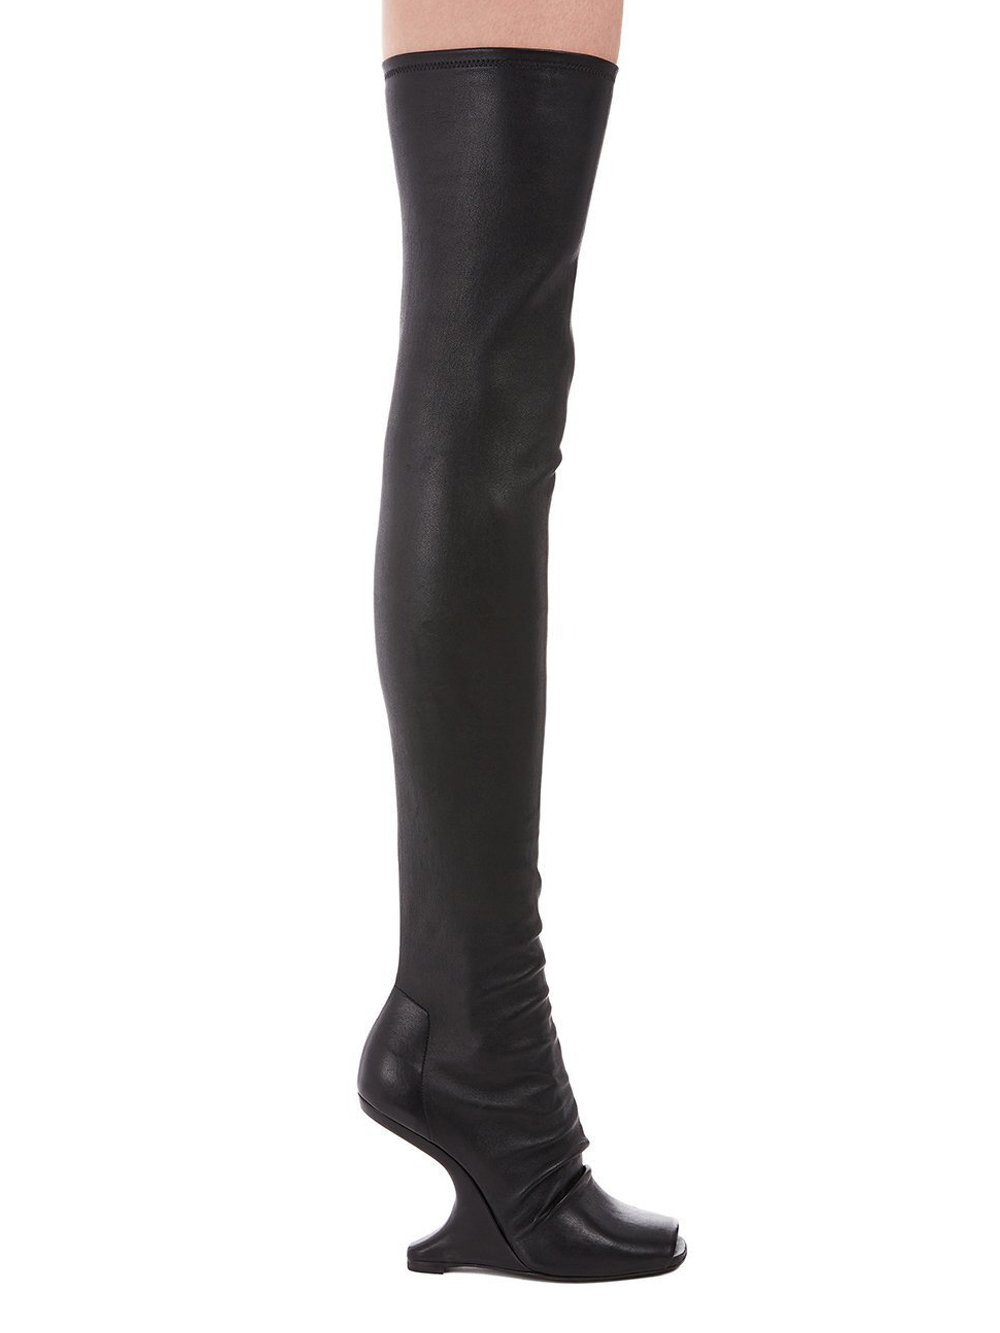 RICK OWENS FW23 LUXOR CANTILEVER 11 THIGH HIGH IN  BLACK STRETCH LAMB LEATHER